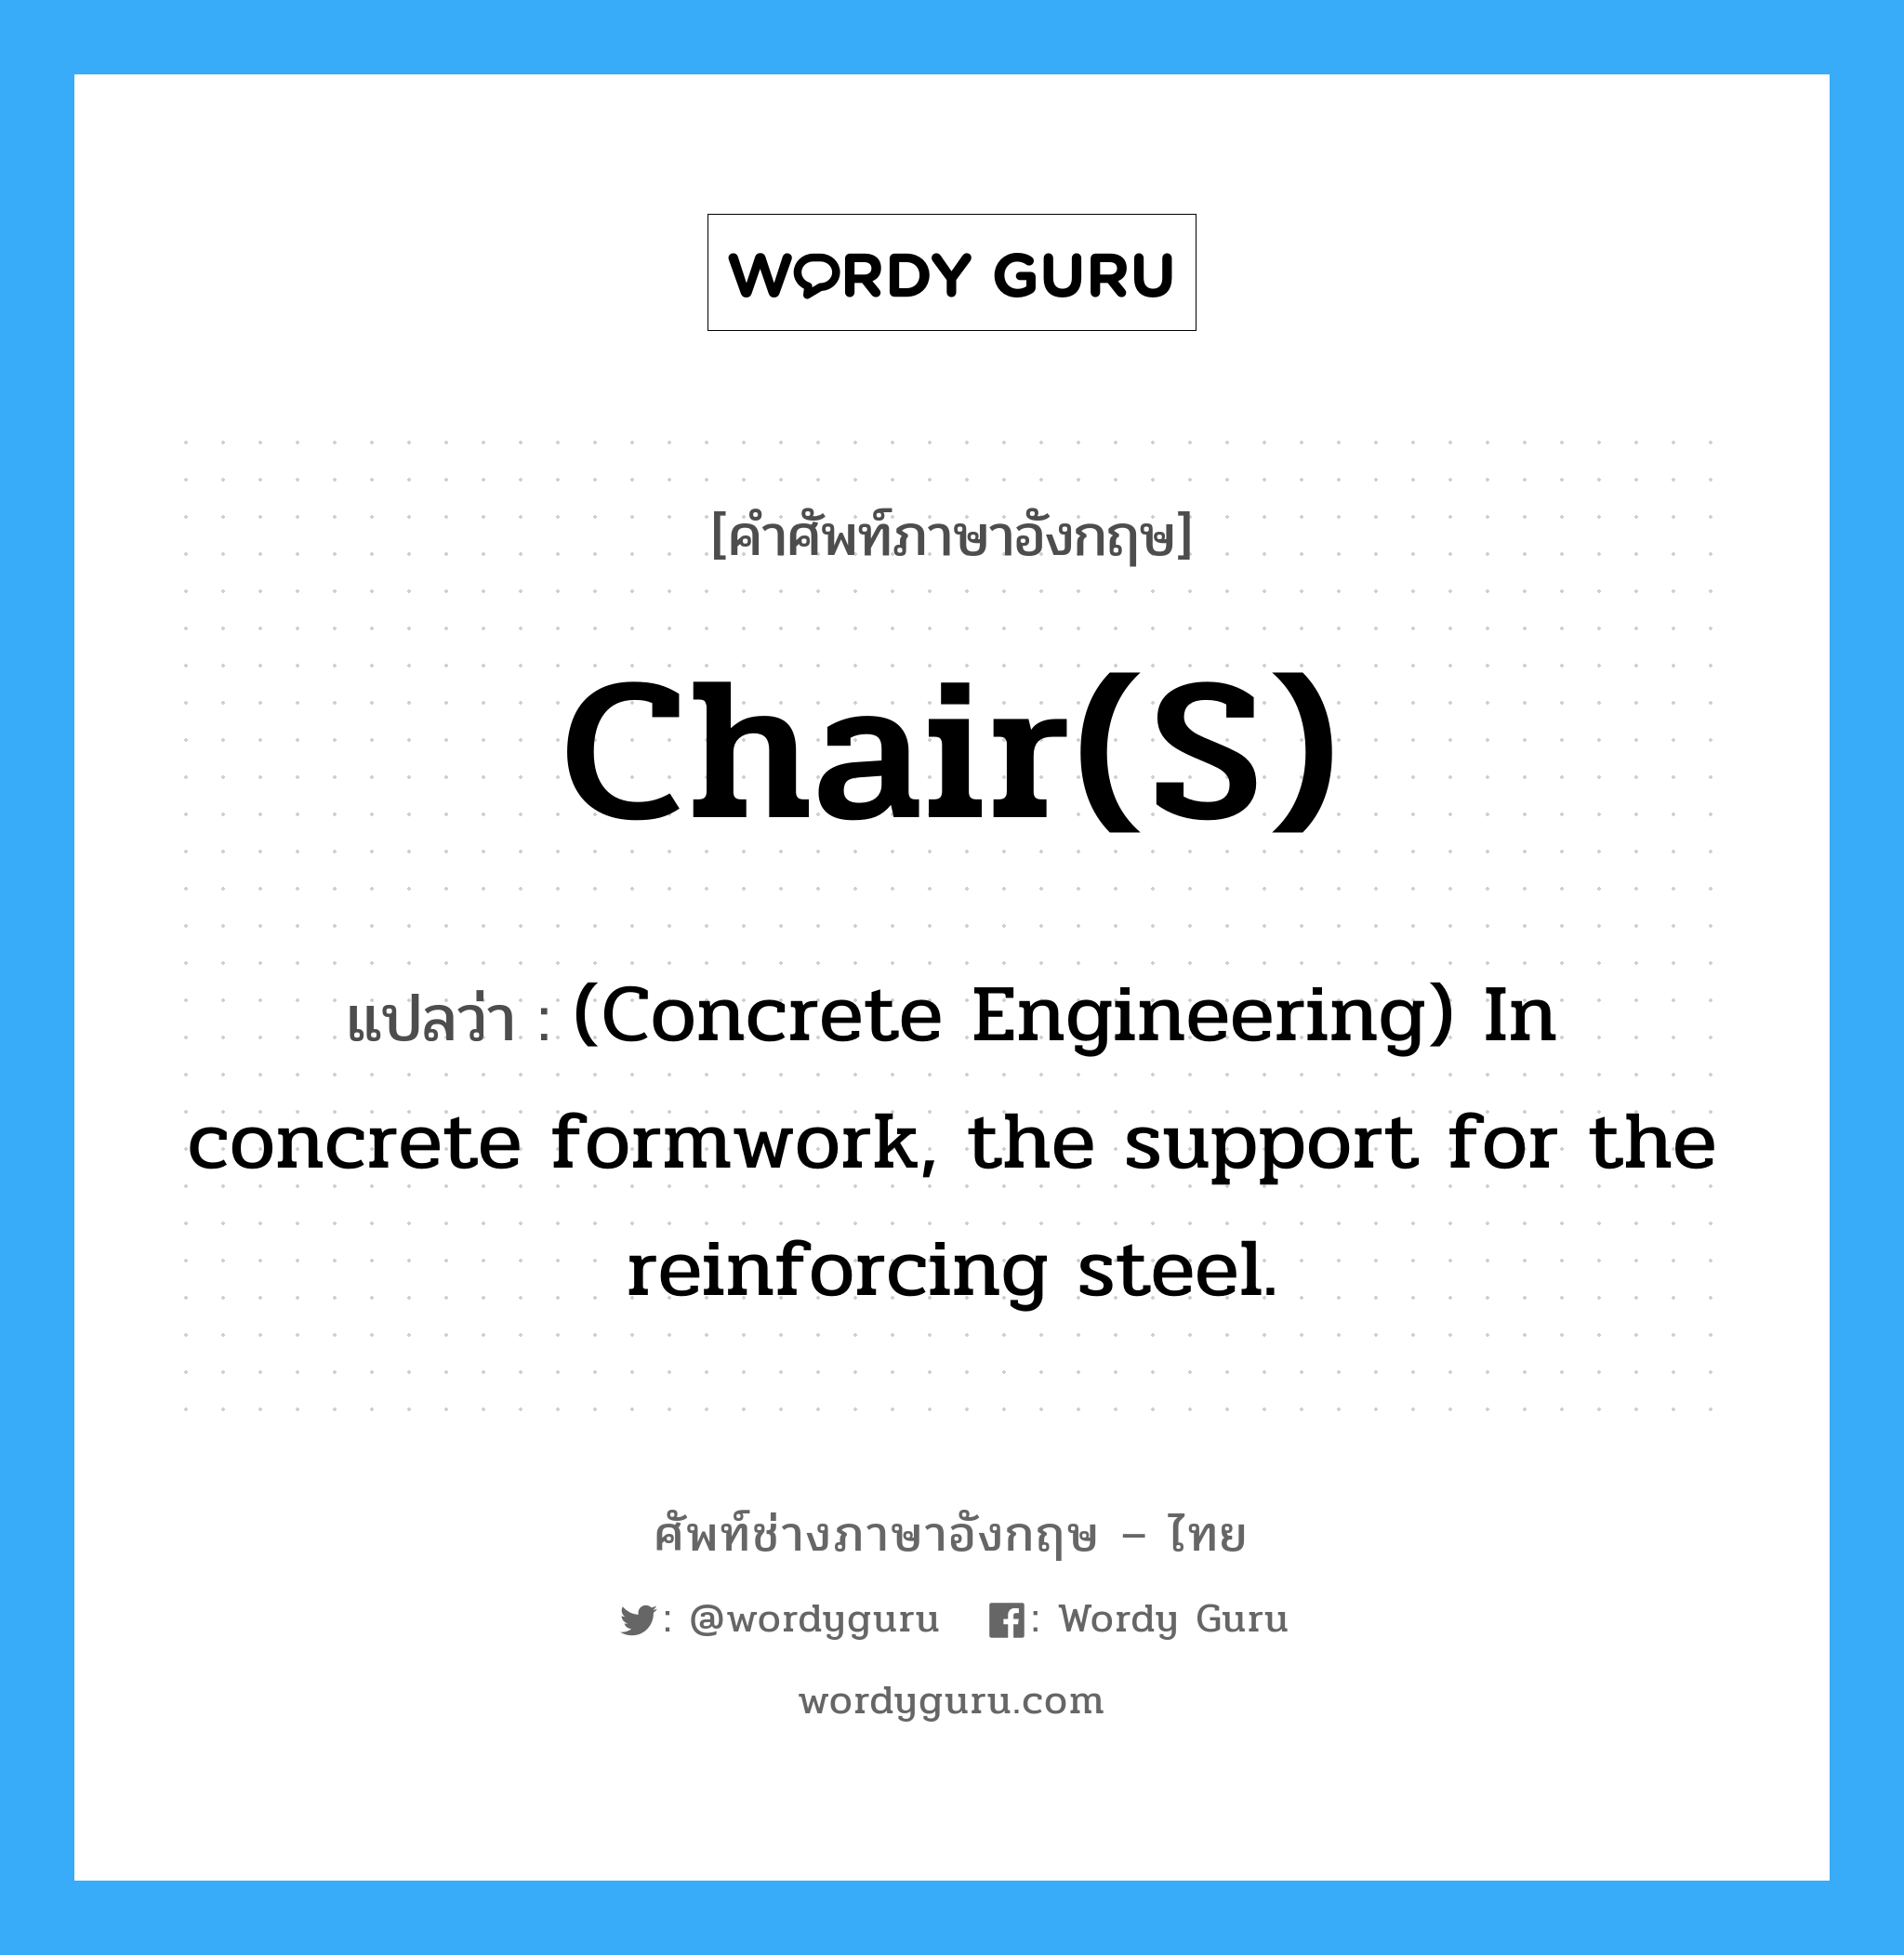 Chair(s) แปลว่า?, คำศัพท์ช่างภาษาอังกฤษ - ไทย Chair(s) คำศัพท์ภาษาอังกฤษ Chair(s) แปลว่า (Concrete Engineering) In concrete formwork, the support for the reinforcing steel.